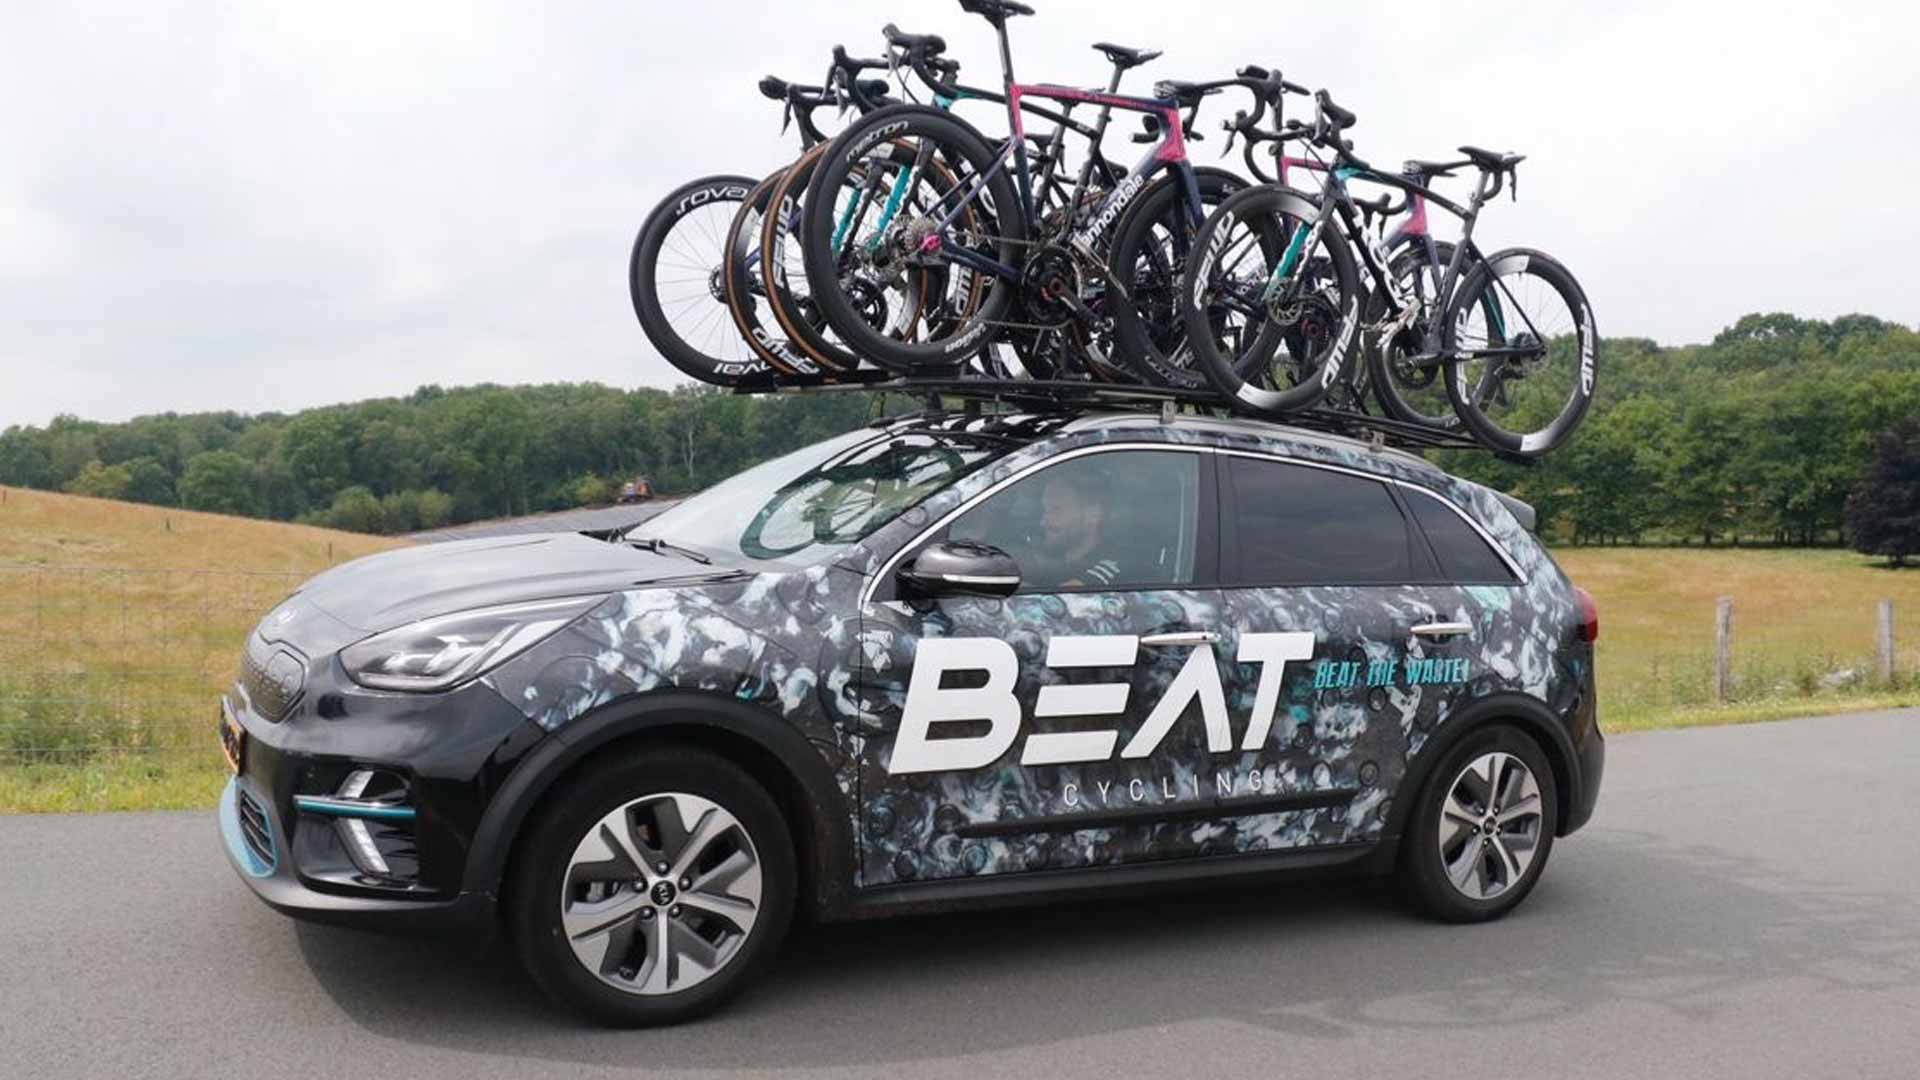 The beat cycling team teamcar with roadbikes on the roof